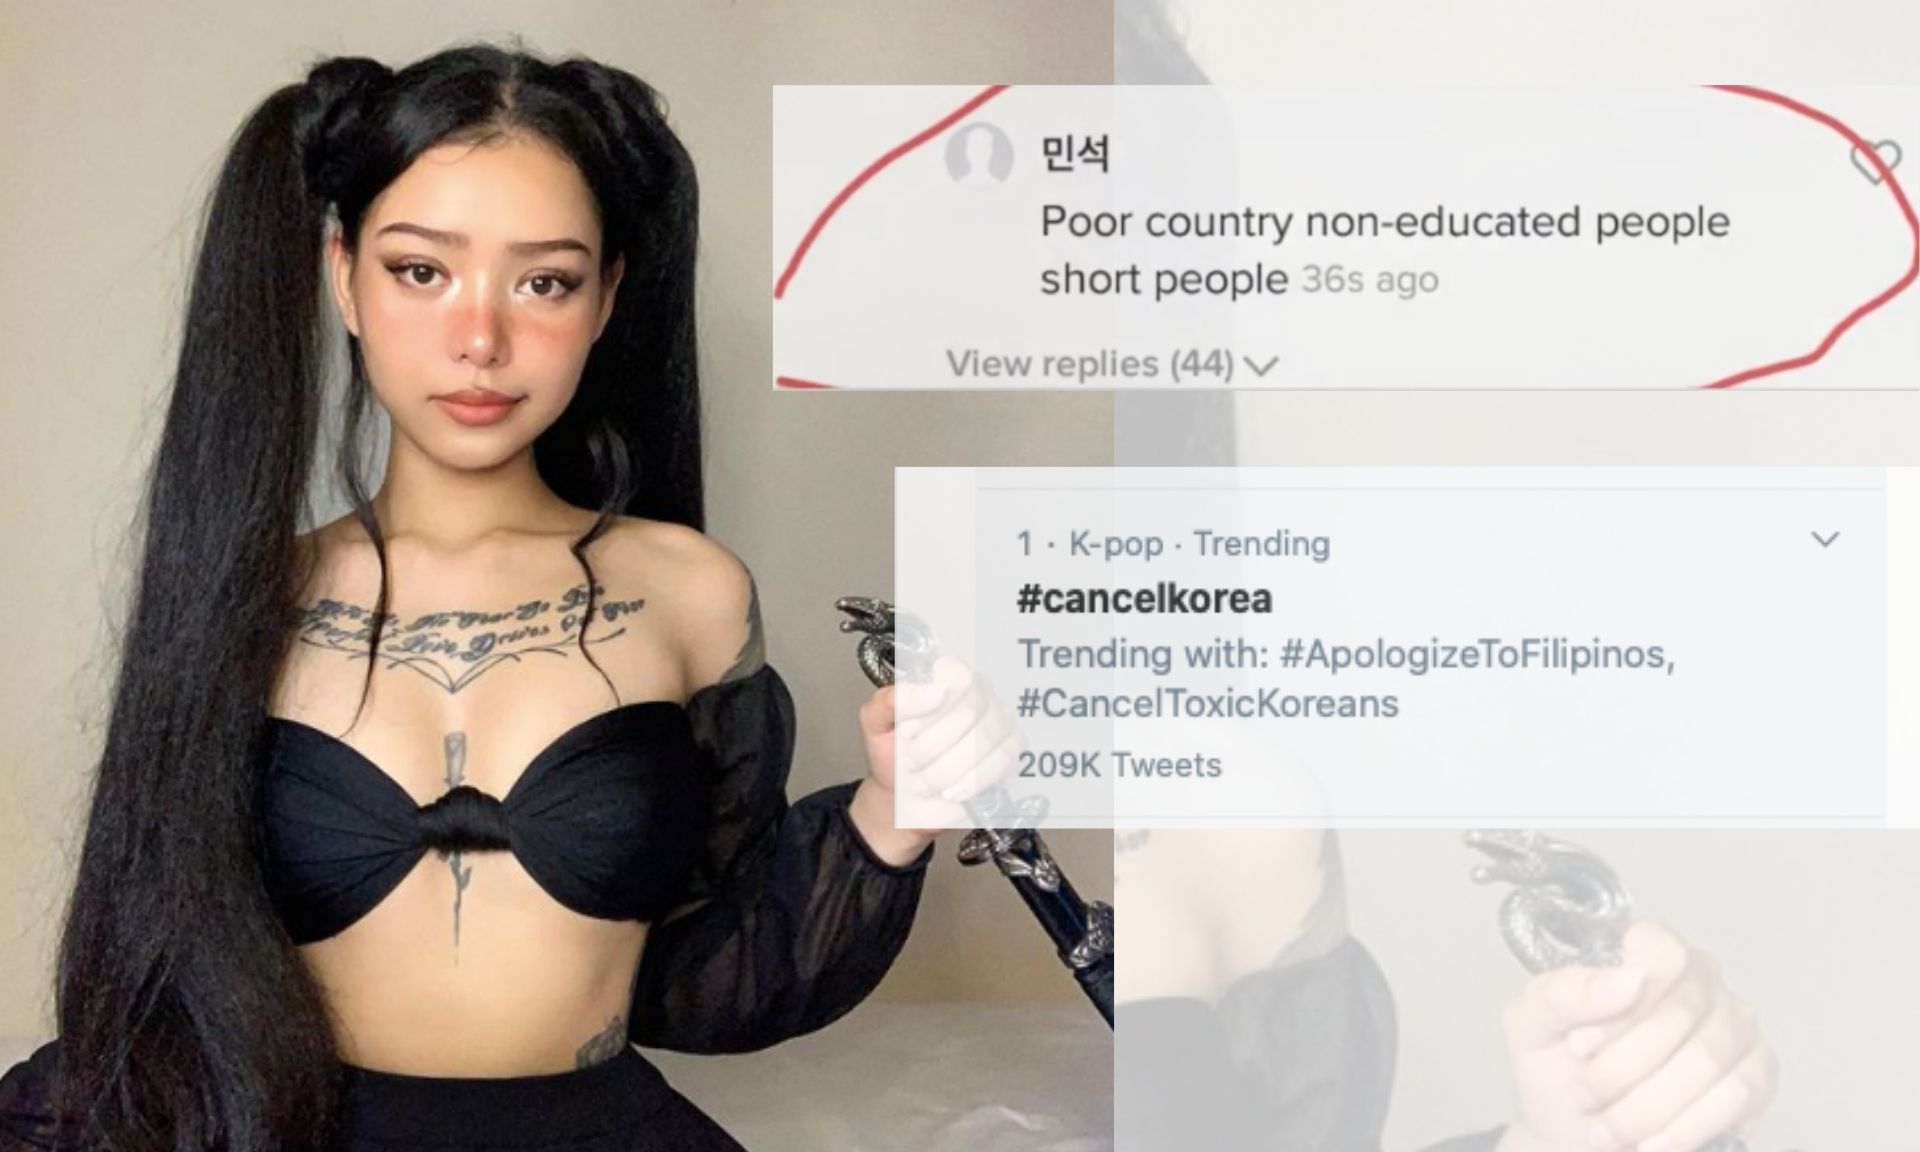 Pinoys Rally To Cancelkorea After Fil Am Influencer Bella Poarch Called Sho...